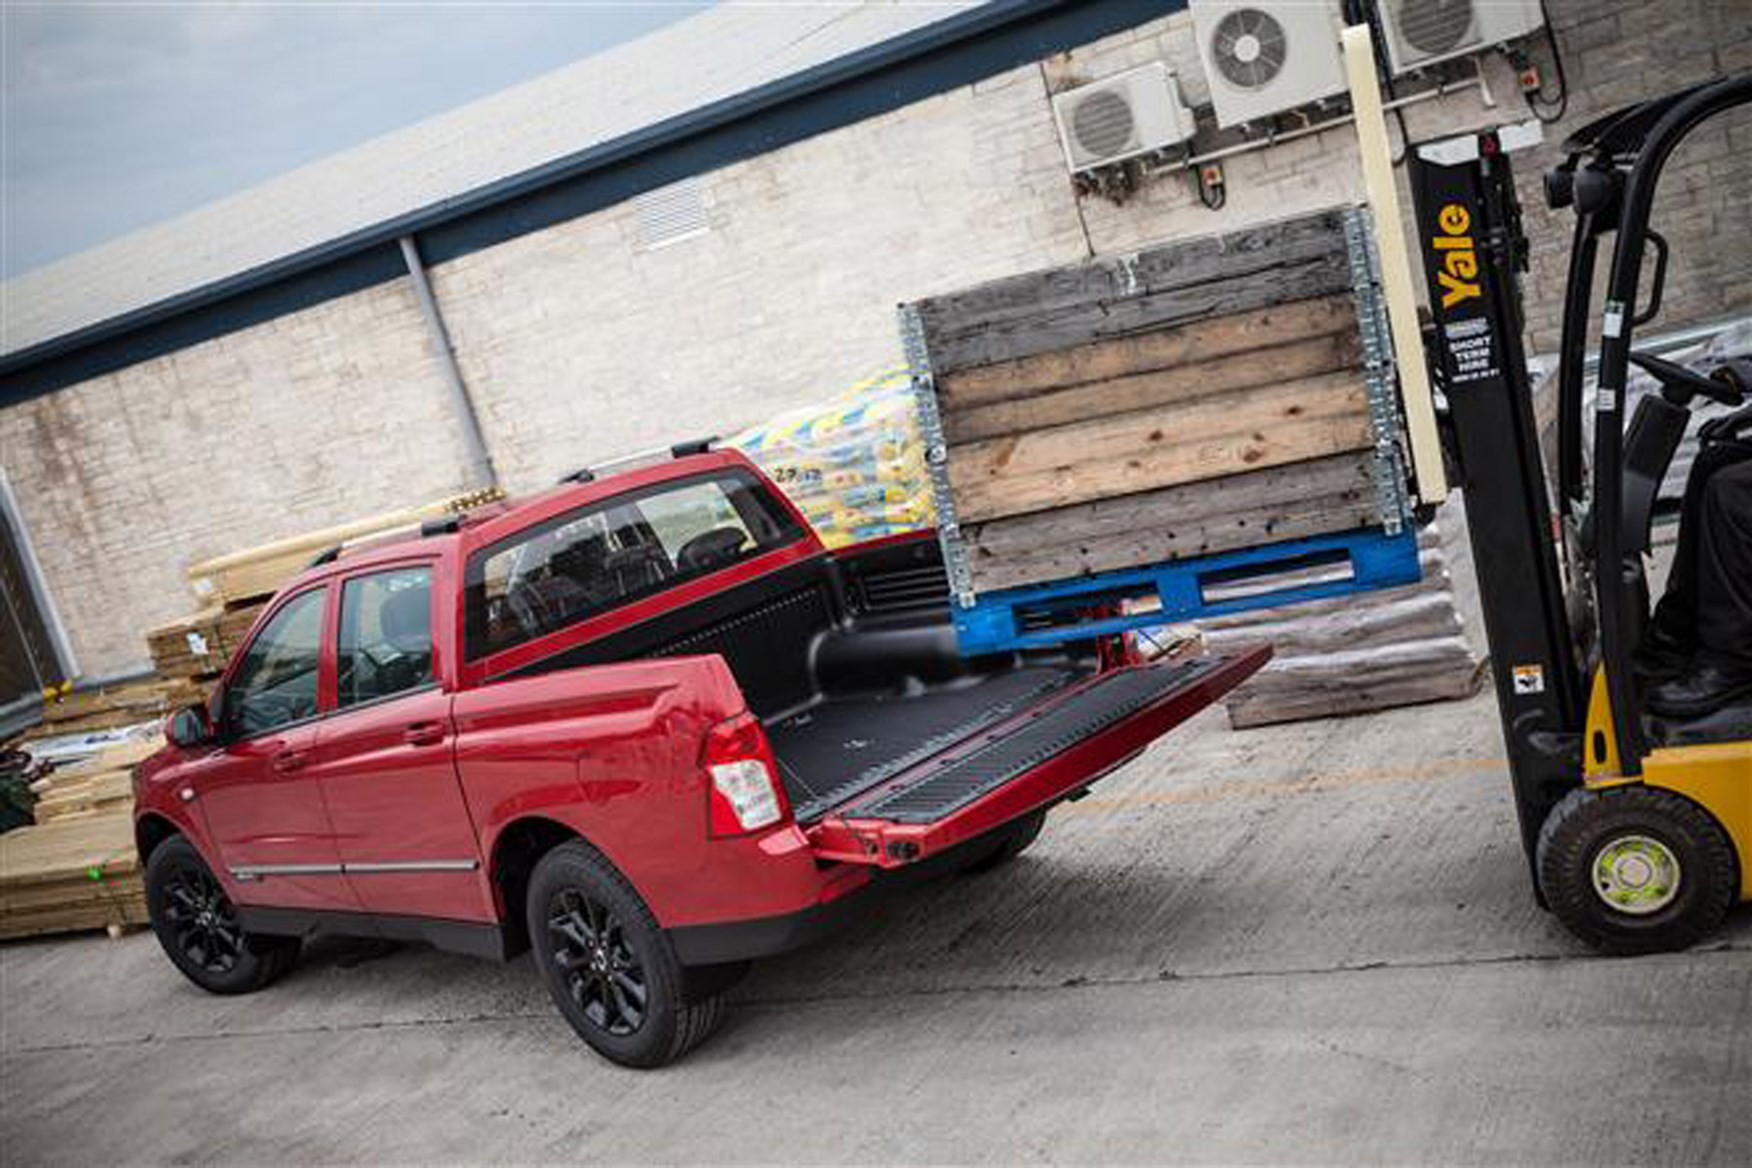 SsangYong Musso full review on Parkers Vans - payload capability